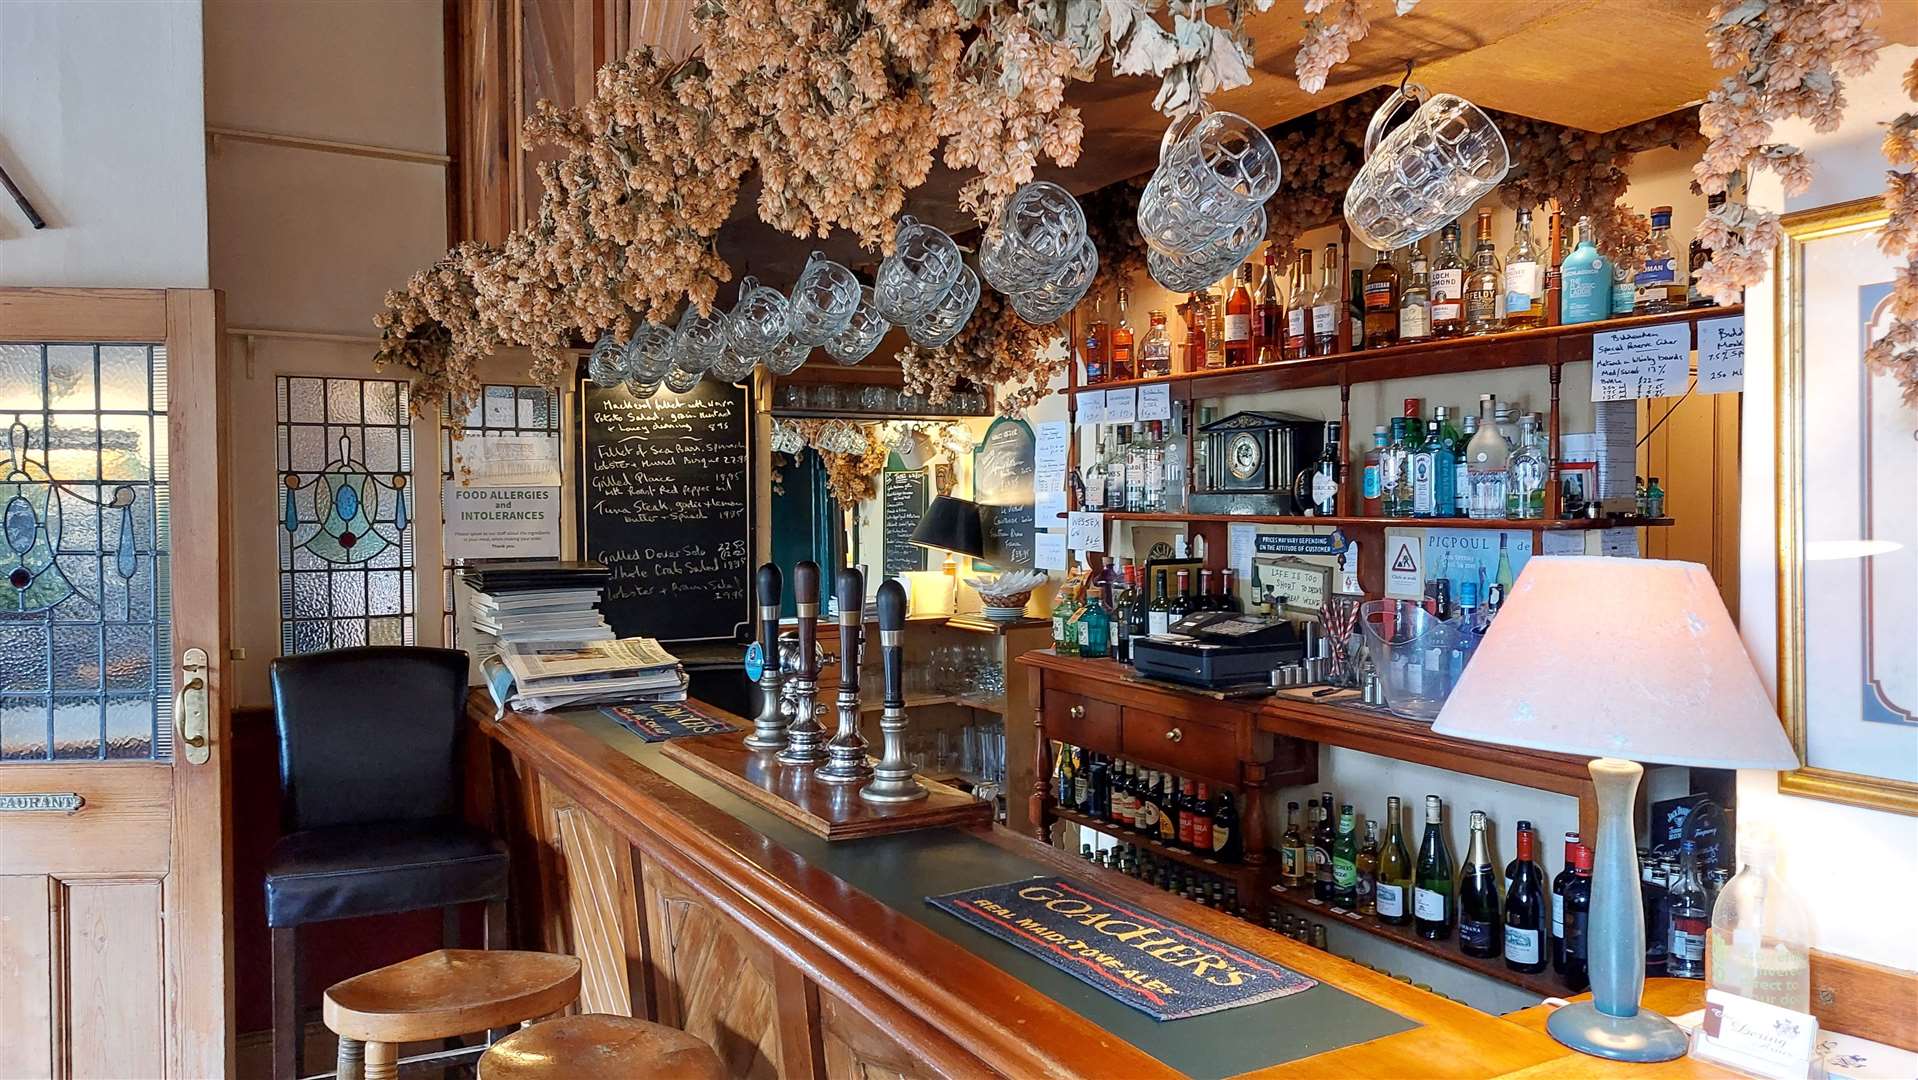 The pub has more than 120 wines on the menu